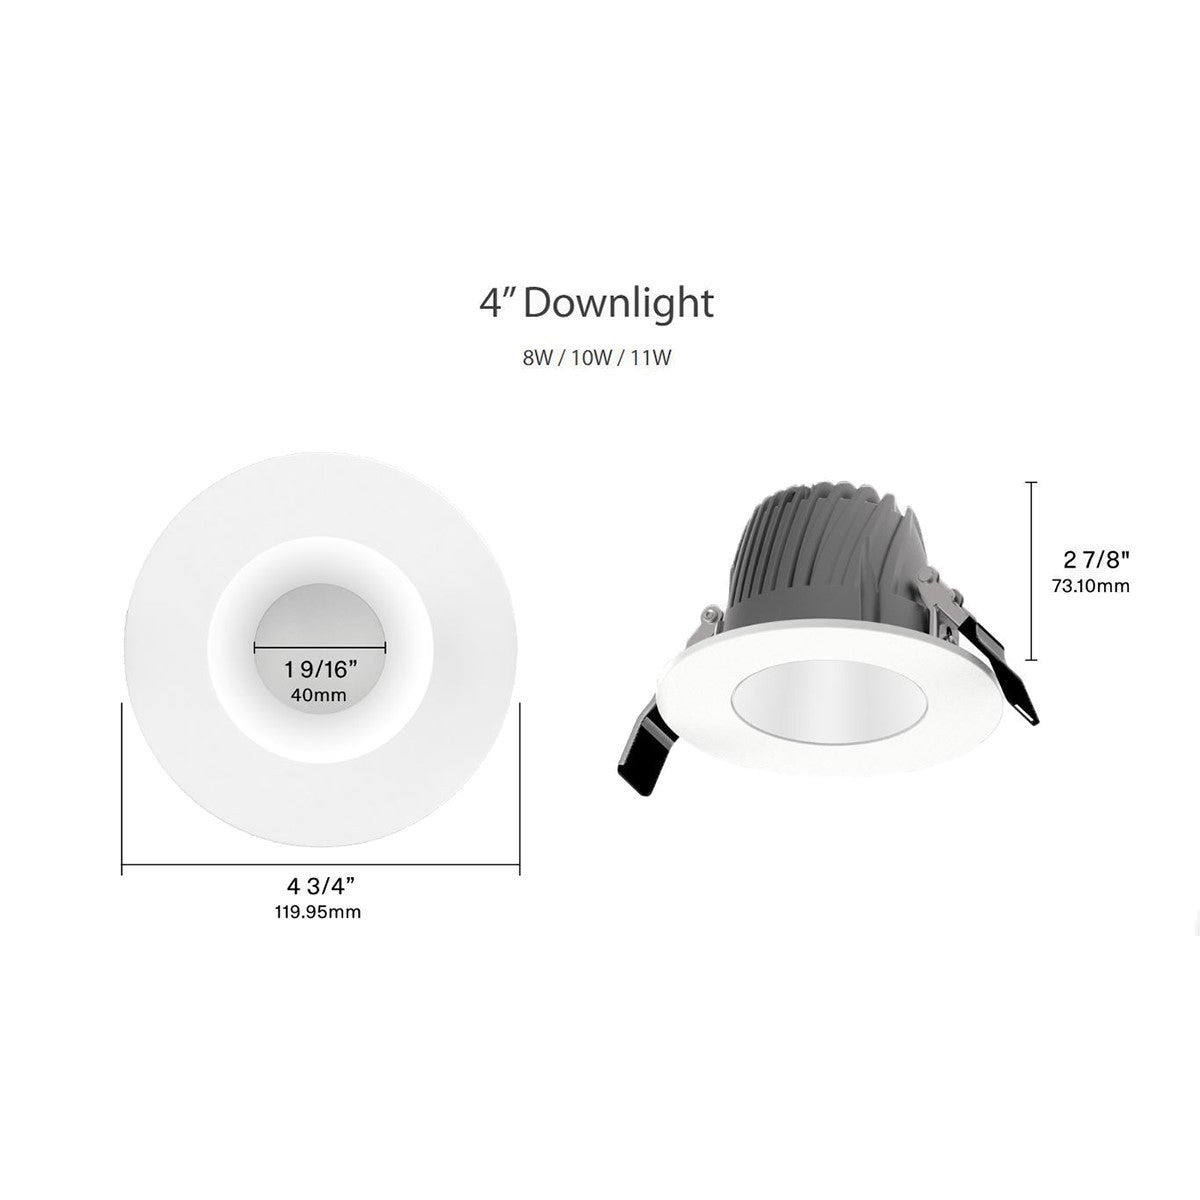 4 Inch LED Deep Regress Commercial Downlight, Field Adjustable 8/10/11W, 500/600/700 Lumens, 30/35/40/50K, Smooth Trim, Matte Silver Finish